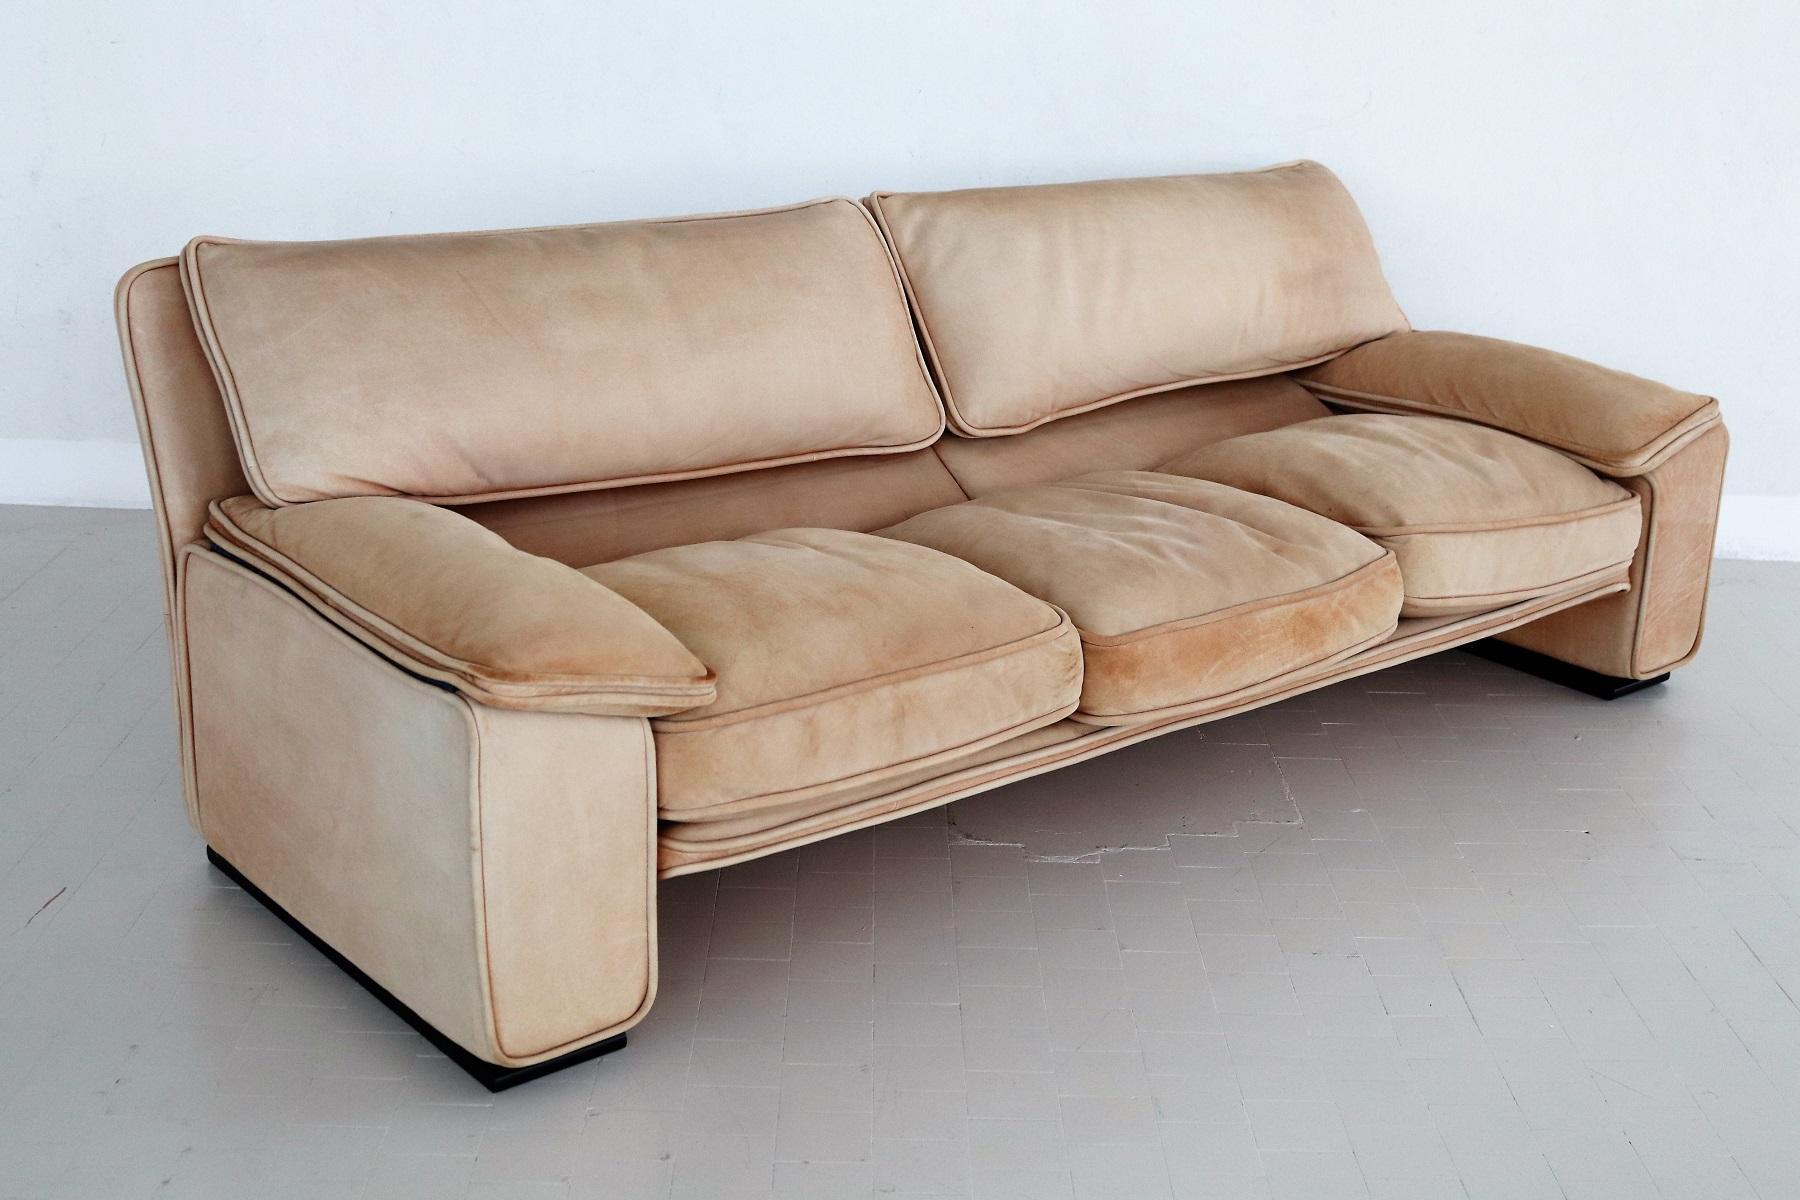 Handsome Italian vintage 3 seater Nappa leather sofa, incredibly comfortable and stylish! 
Made in Italy in the 1970s by Brunati.
Nappa leather is made from full-grain, un-split animal hide and not modified in any way. Just the hair is removed from